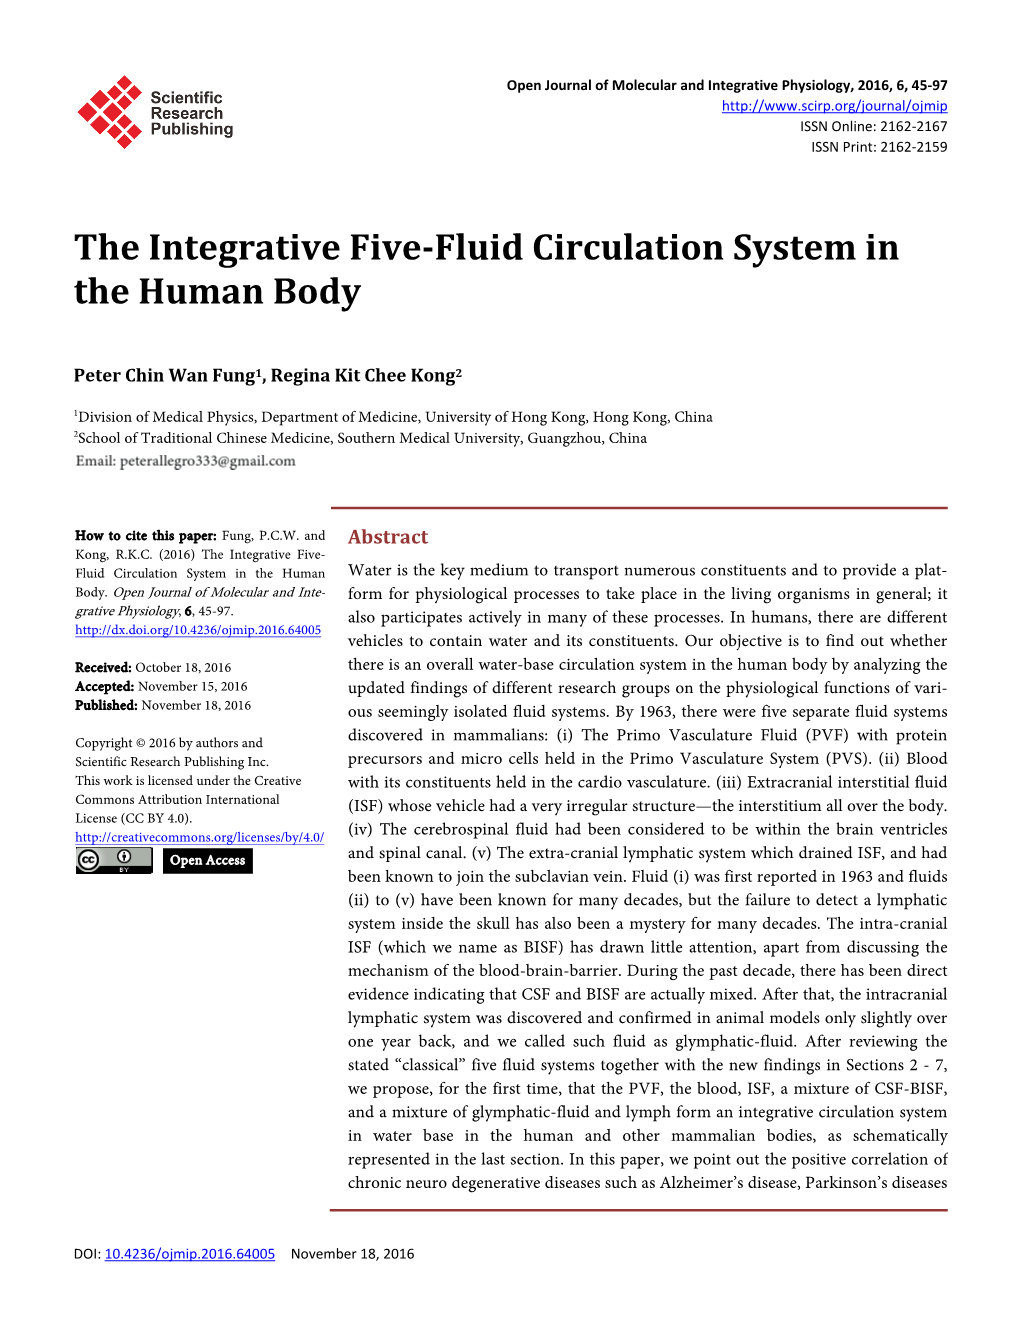 The Integrative Five-Fluid Circulation System in the Human Body